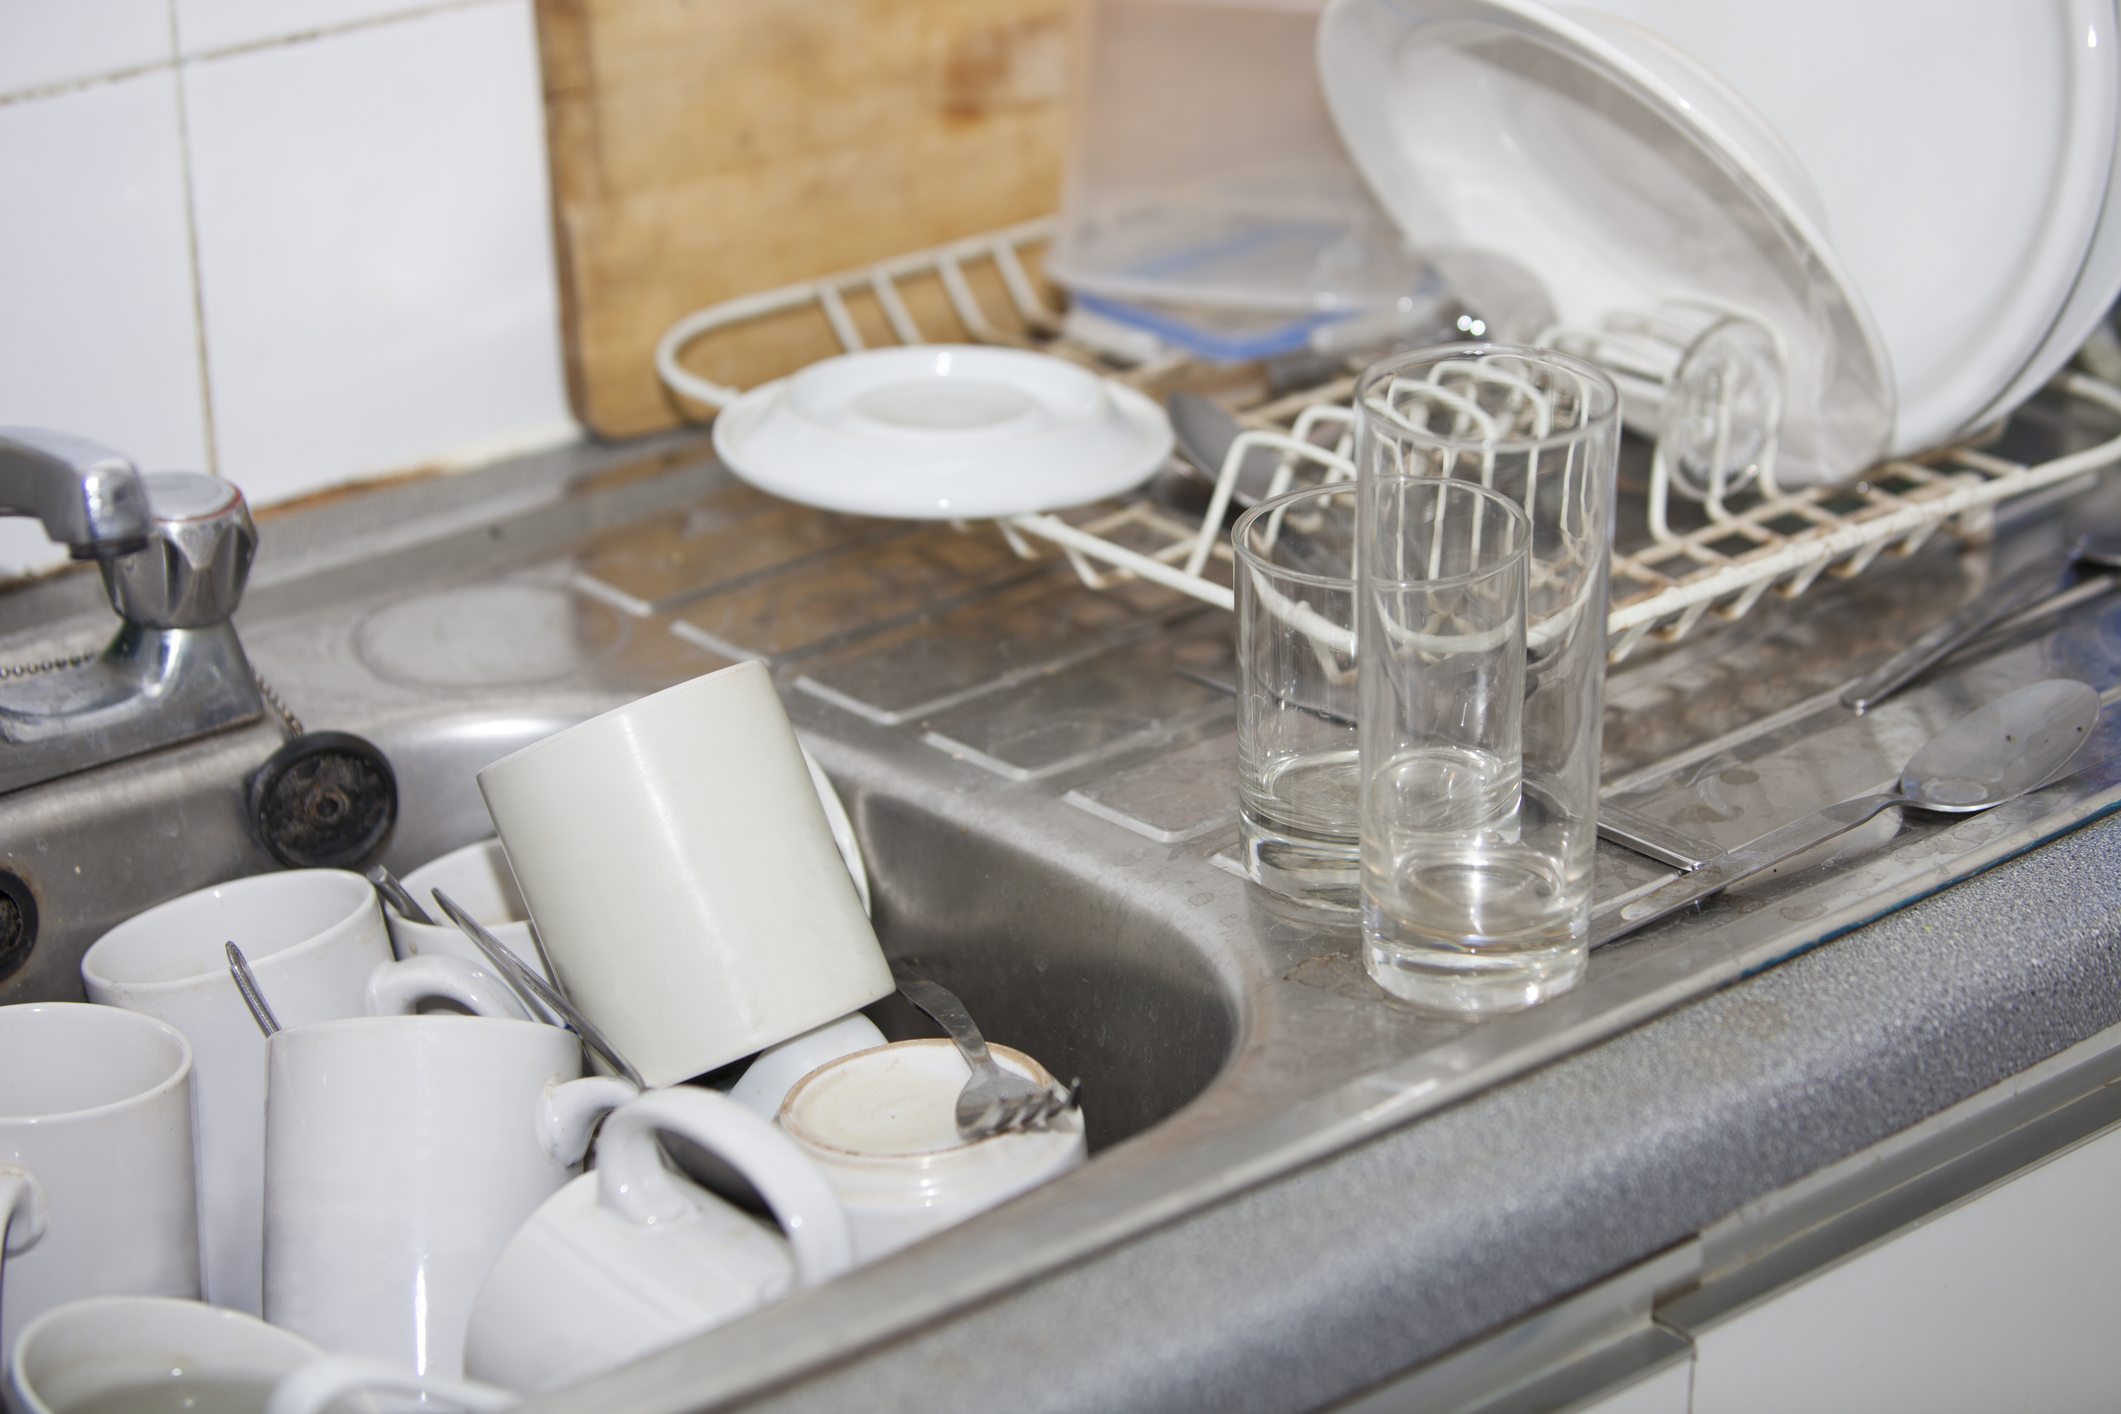 Dirty dishes in the office kitchen